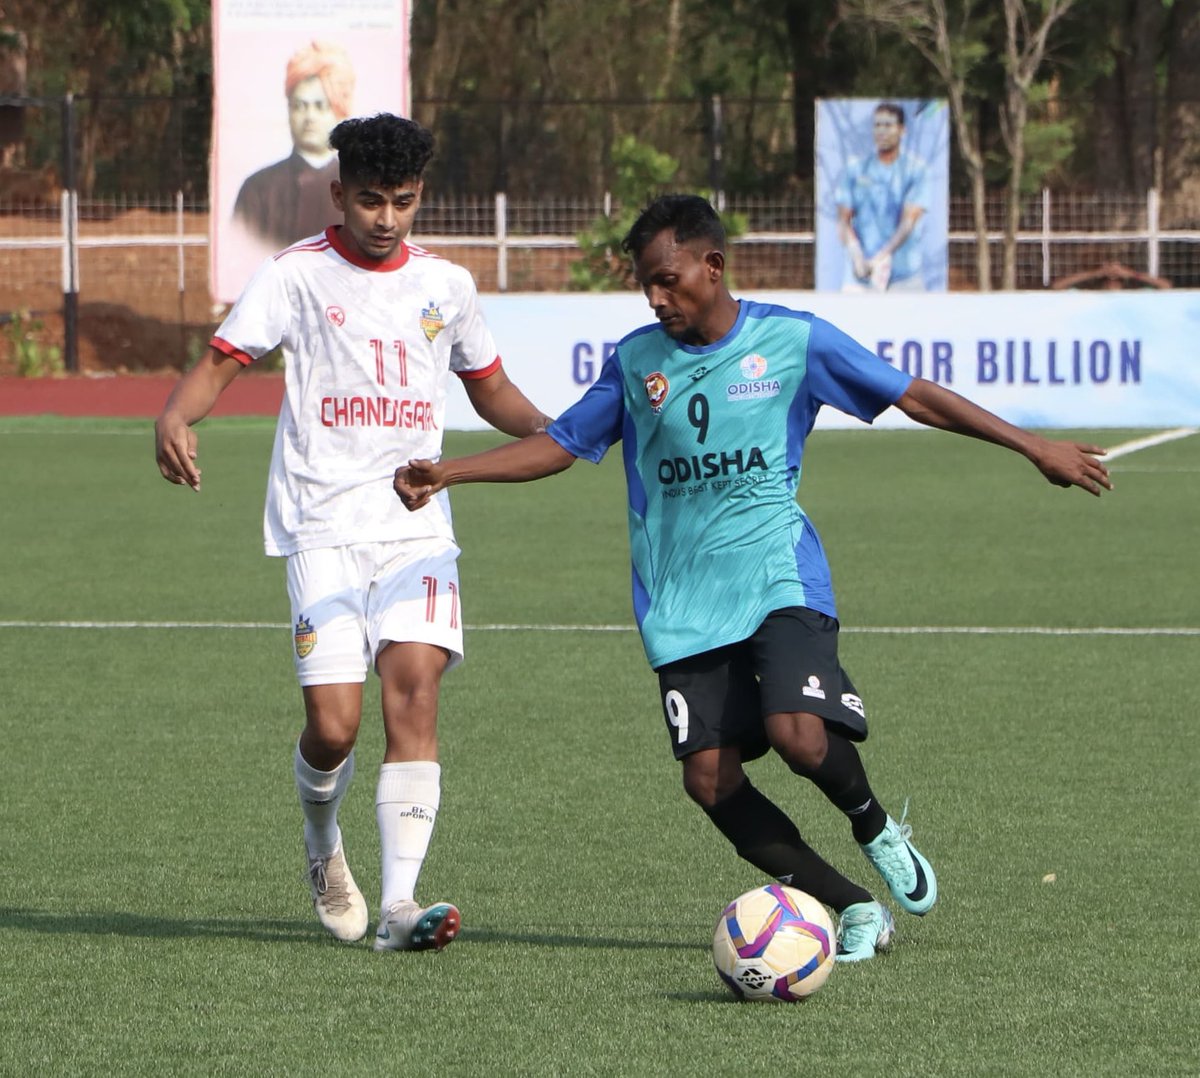 Anil Toppo and Chandramohan Purty lead Odisha to a 2-0 victory over Chandigarh in the Swami Vivekananda U20 Men’s NFC! 👏🔥

#IndianFootball ⚽️